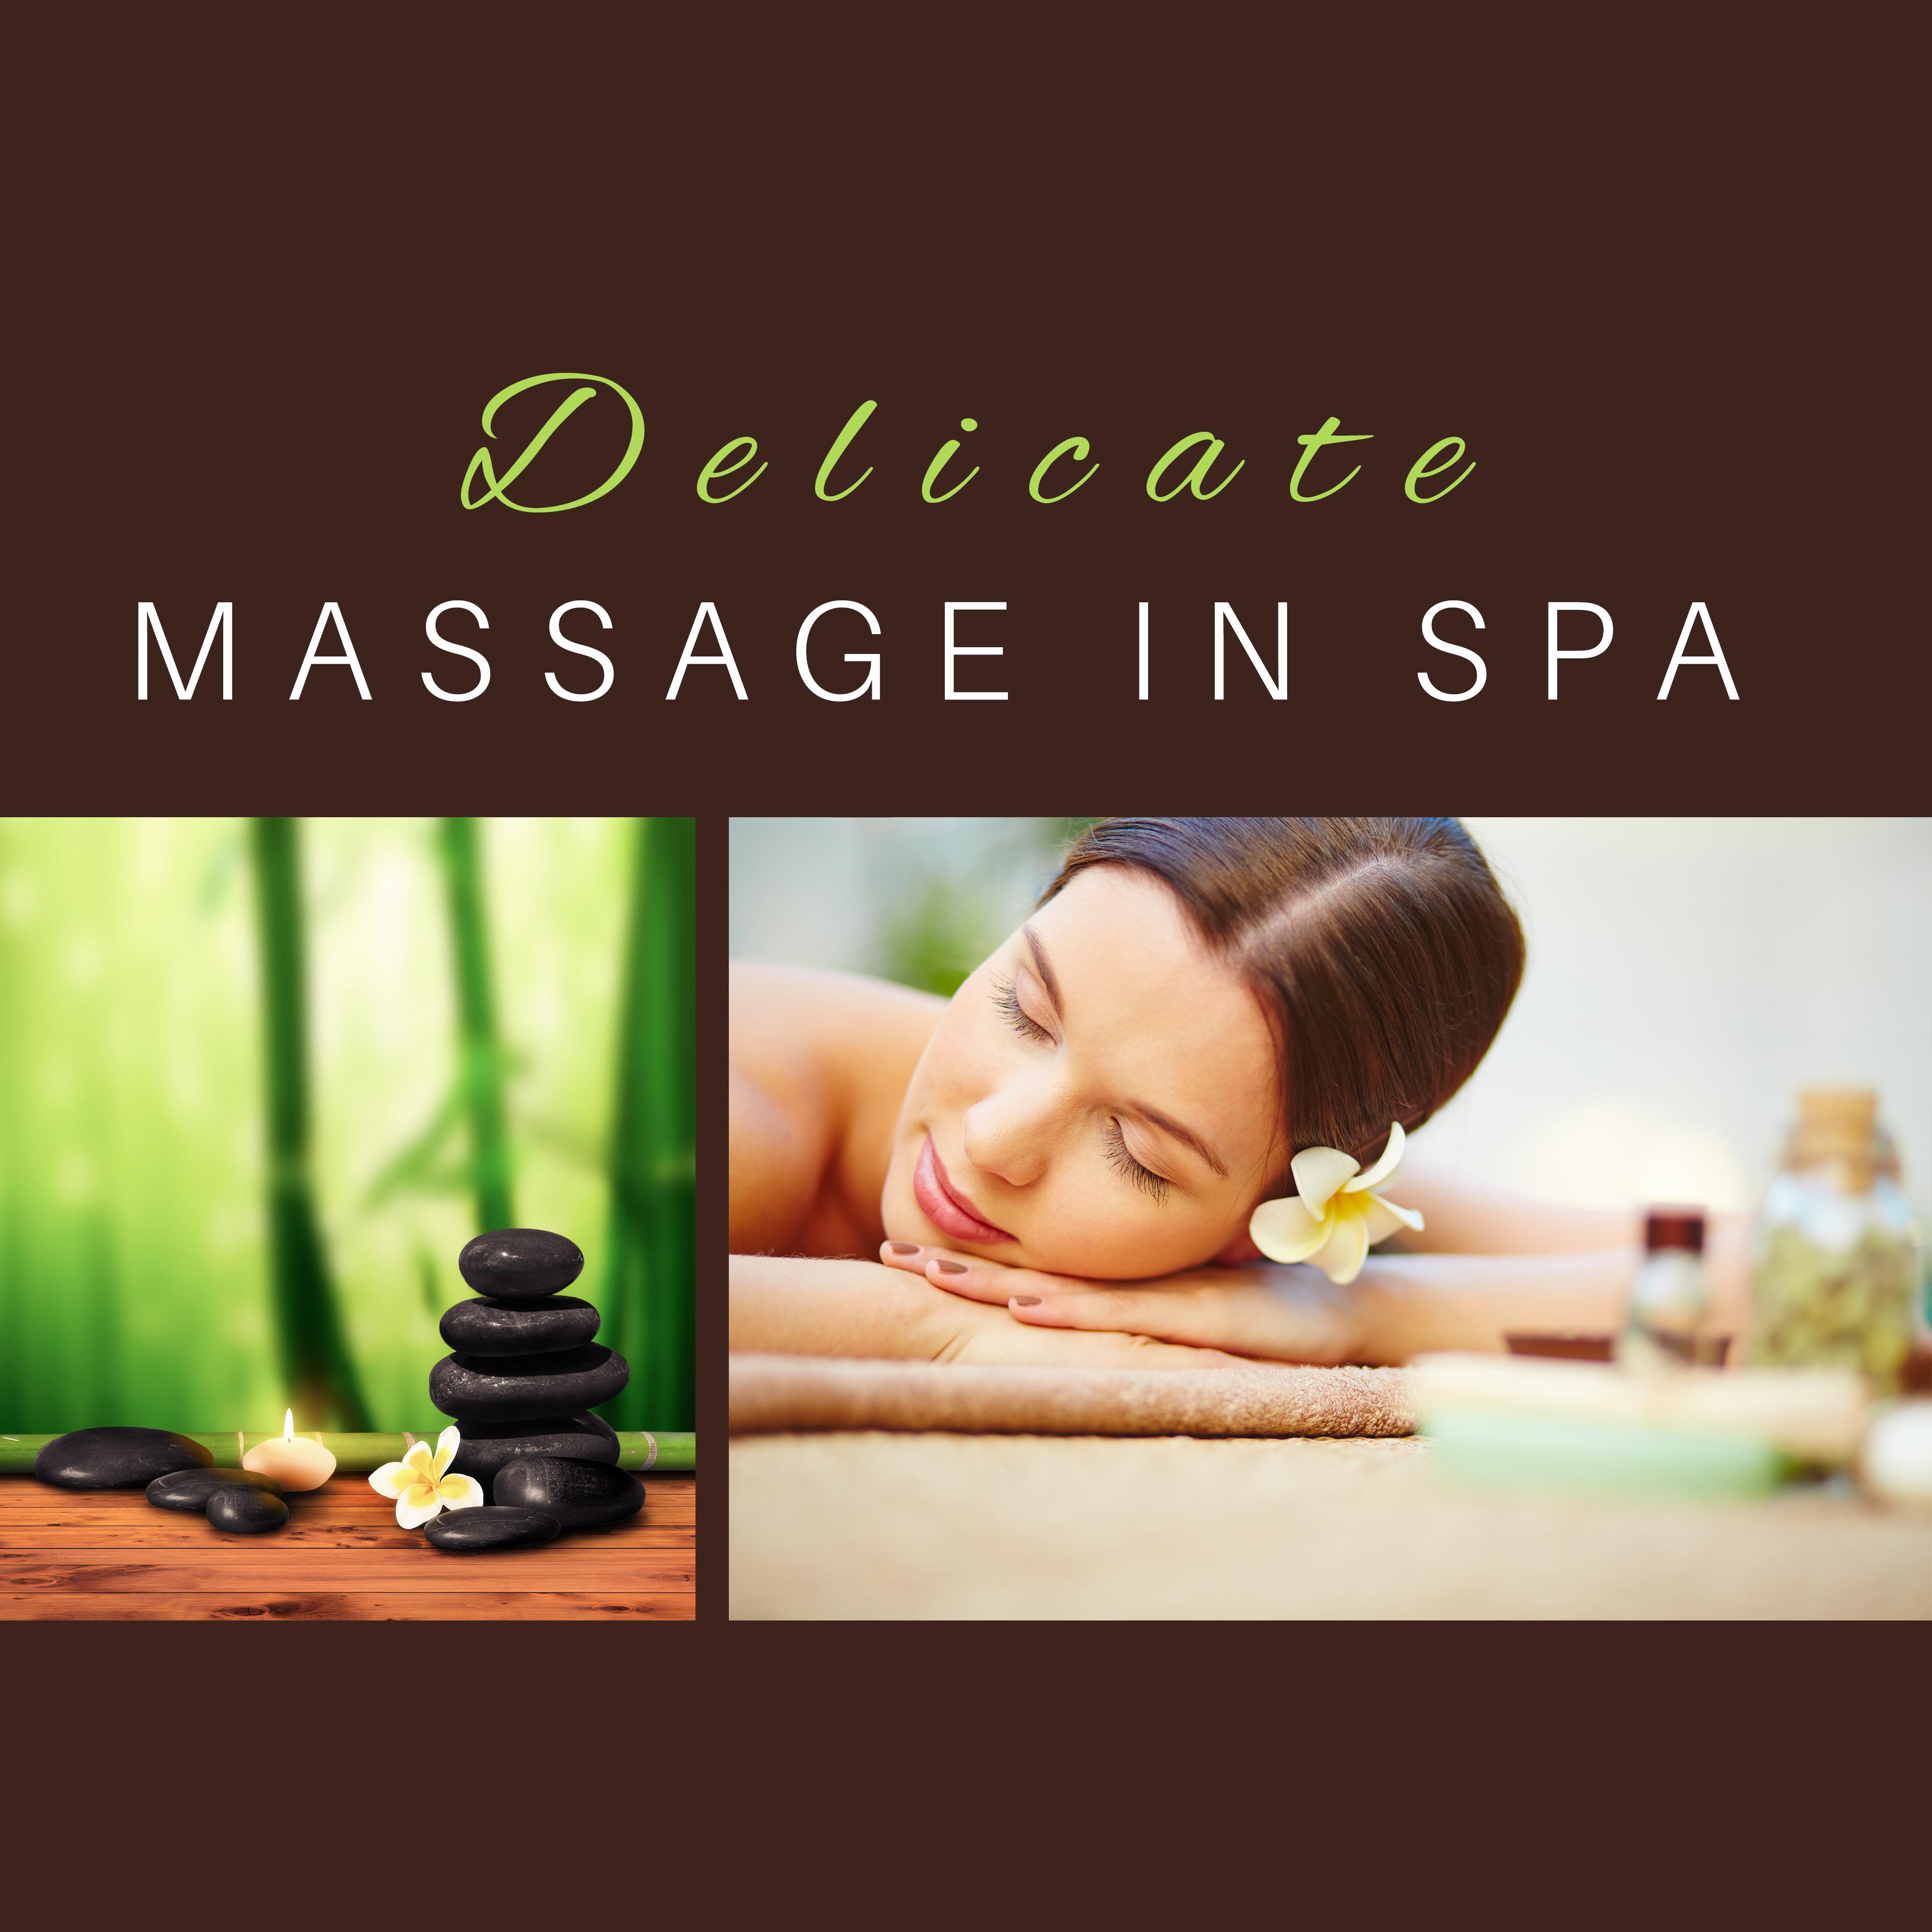 Delicate Massage in Spa – Soft Music for Relaxation, Pure Mind, Healing Spa, Relaxing Therapy, Wellness, Zen Garden